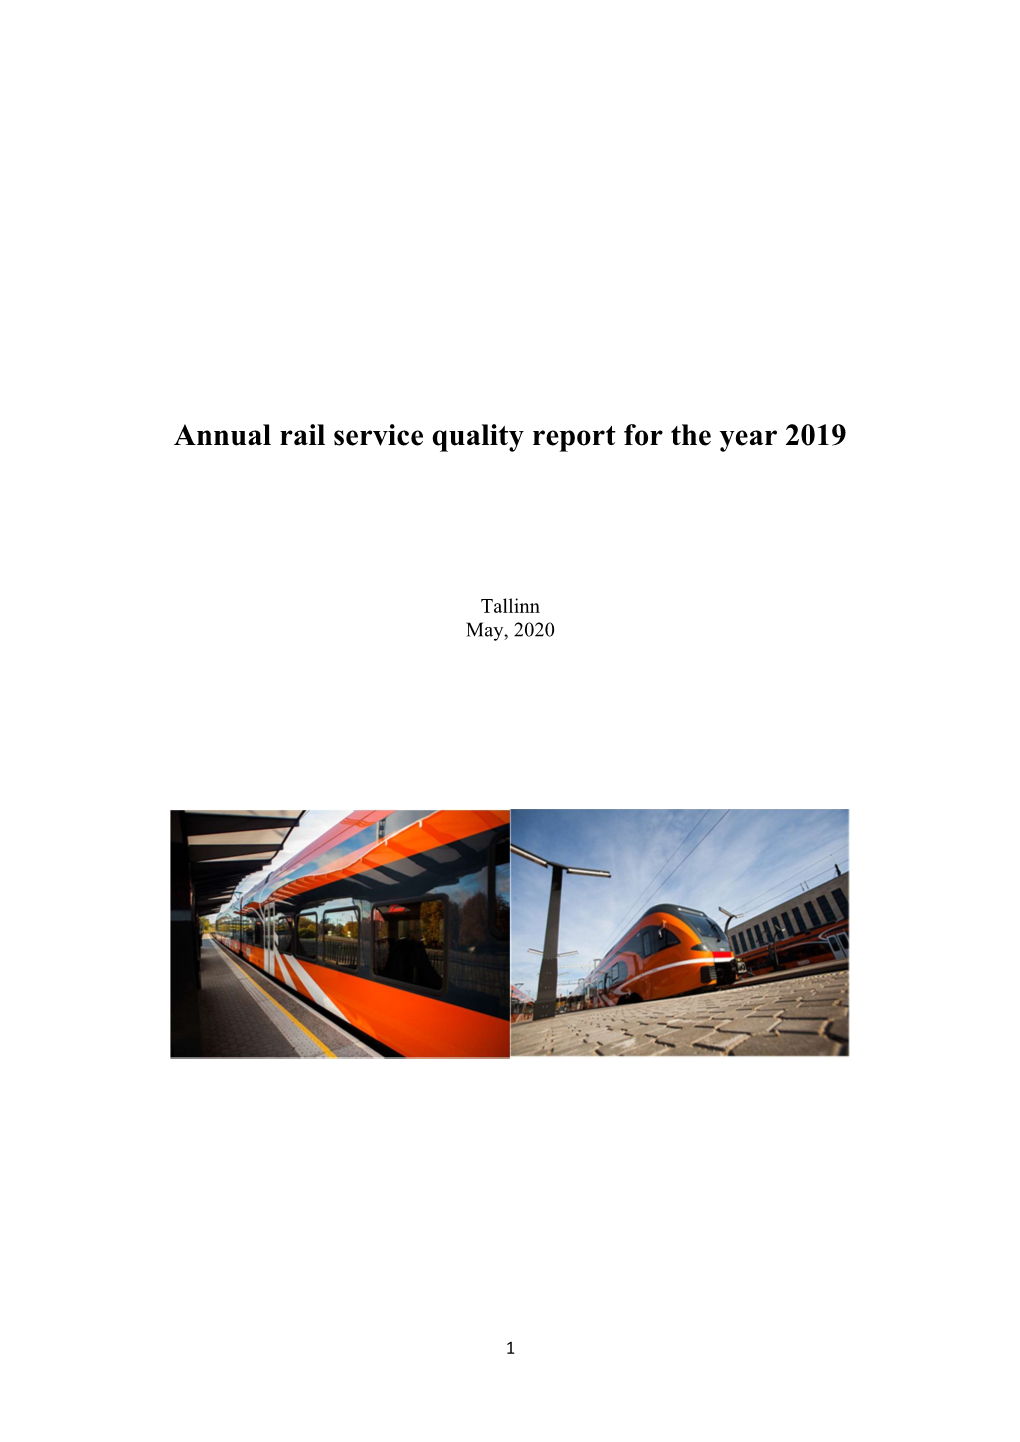 Annual Rail Service Quality Report for the Year 2019